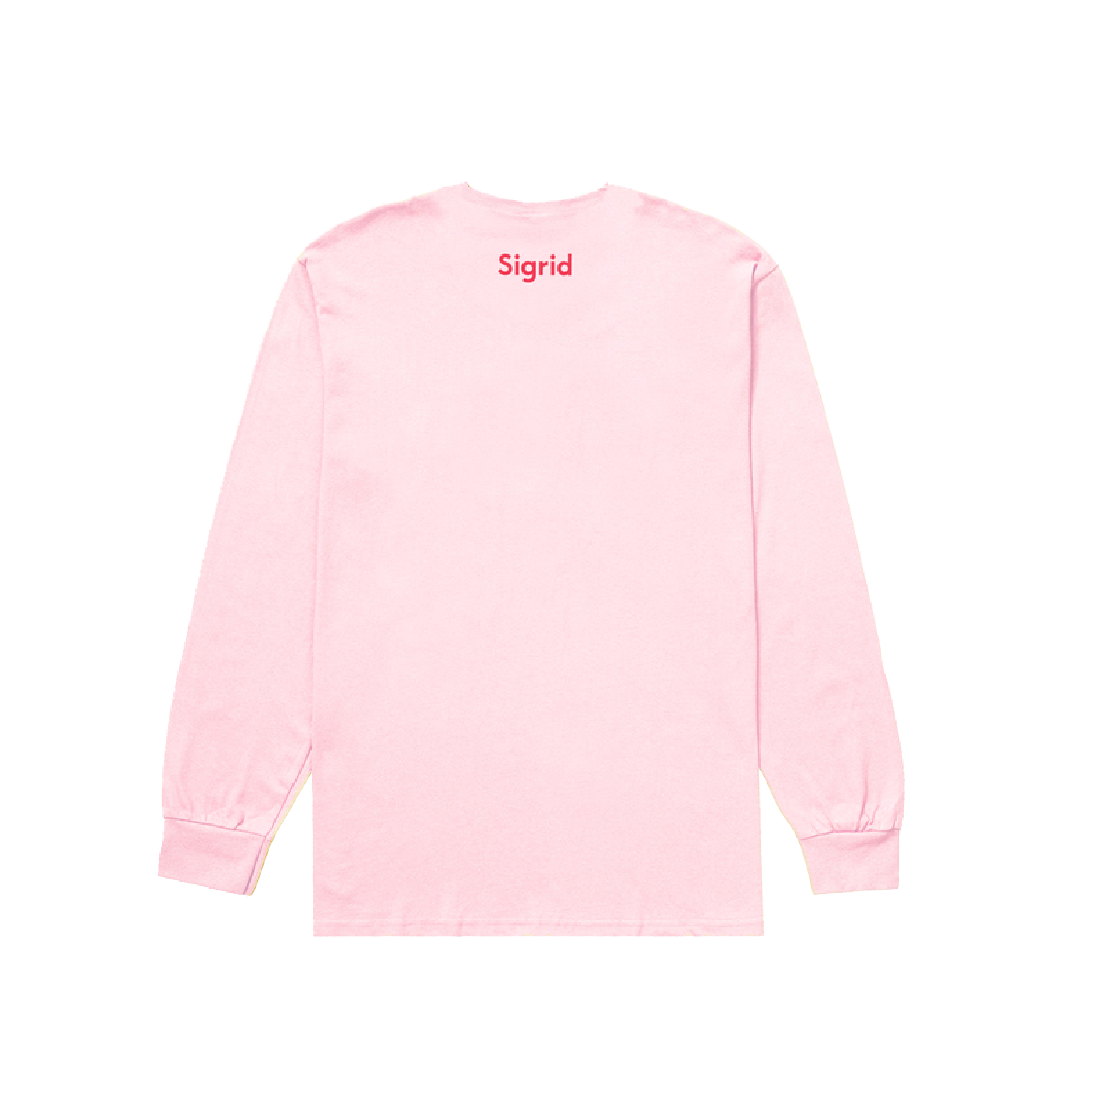 Sigrid - Thank Me Later Pink Longsleeve Tee